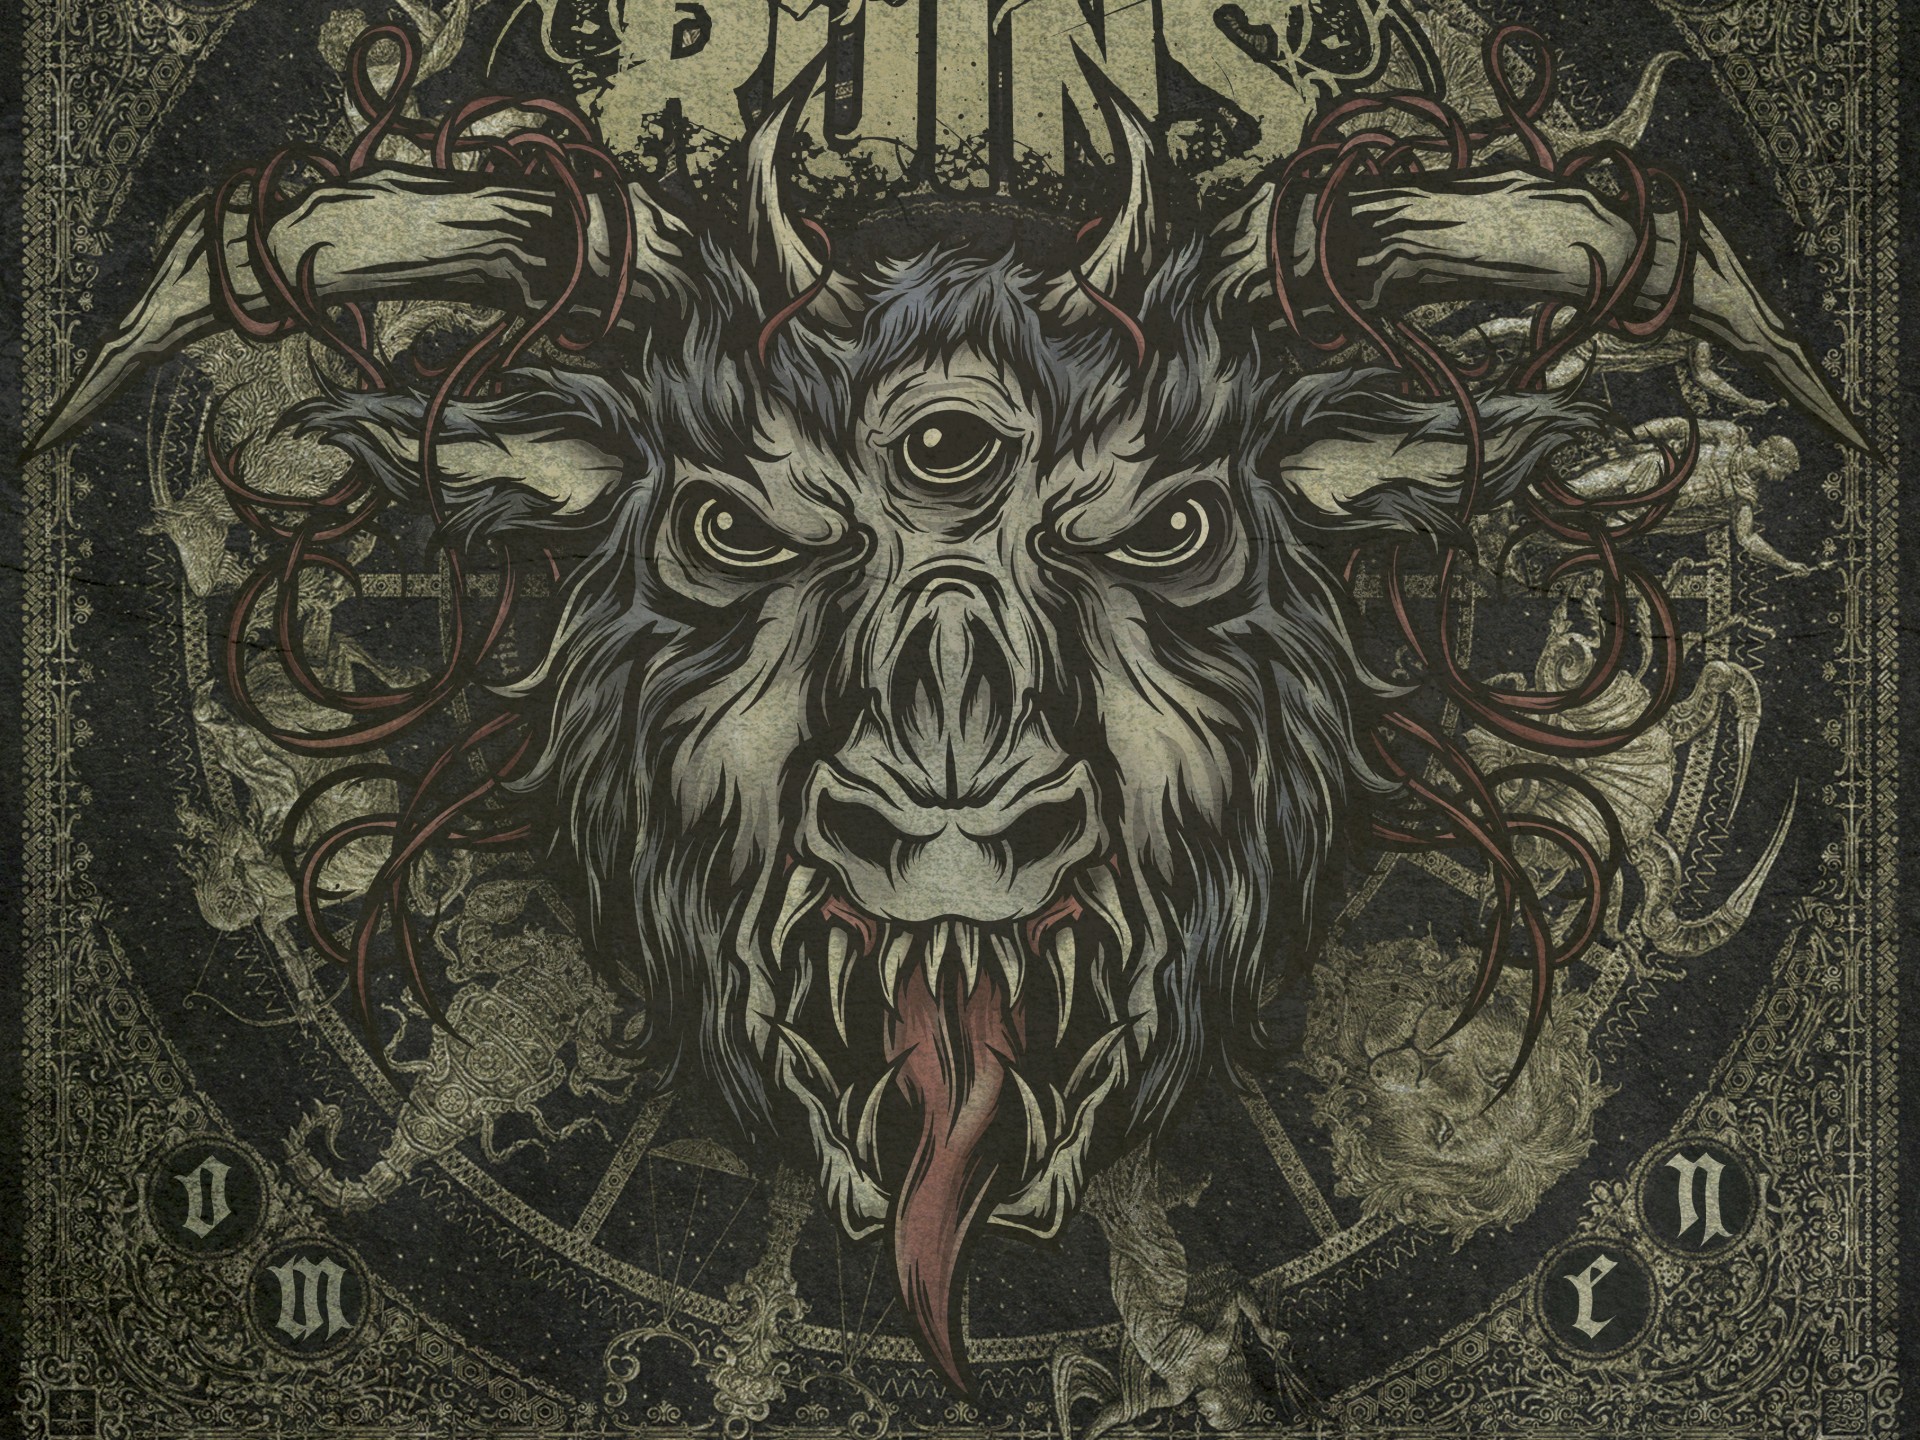 Metal Music Horns Creature Eyes Teeth Within The Ruins Omen 1920x1440